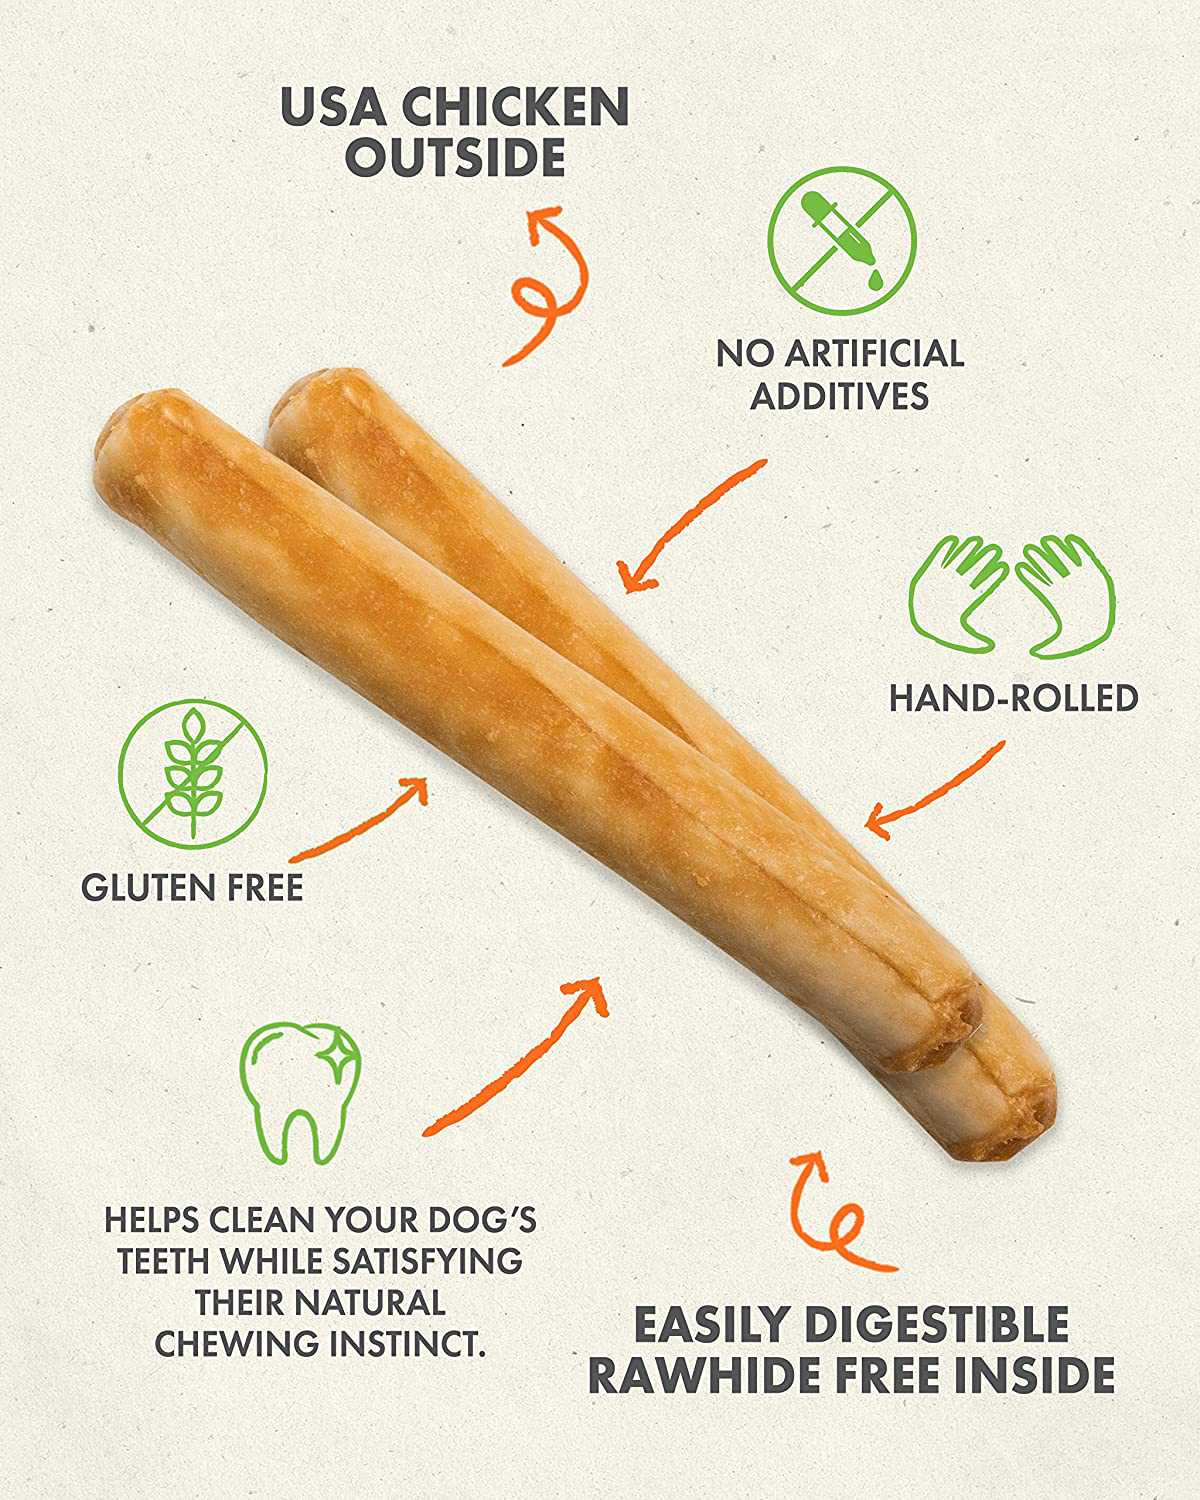 Canine Naturals Chicken Recipe Chew - 100% Rawhide Free and Collagen Free Dog Treats - Made from USA Raised Chicken - All-Natural and Easily Digestible